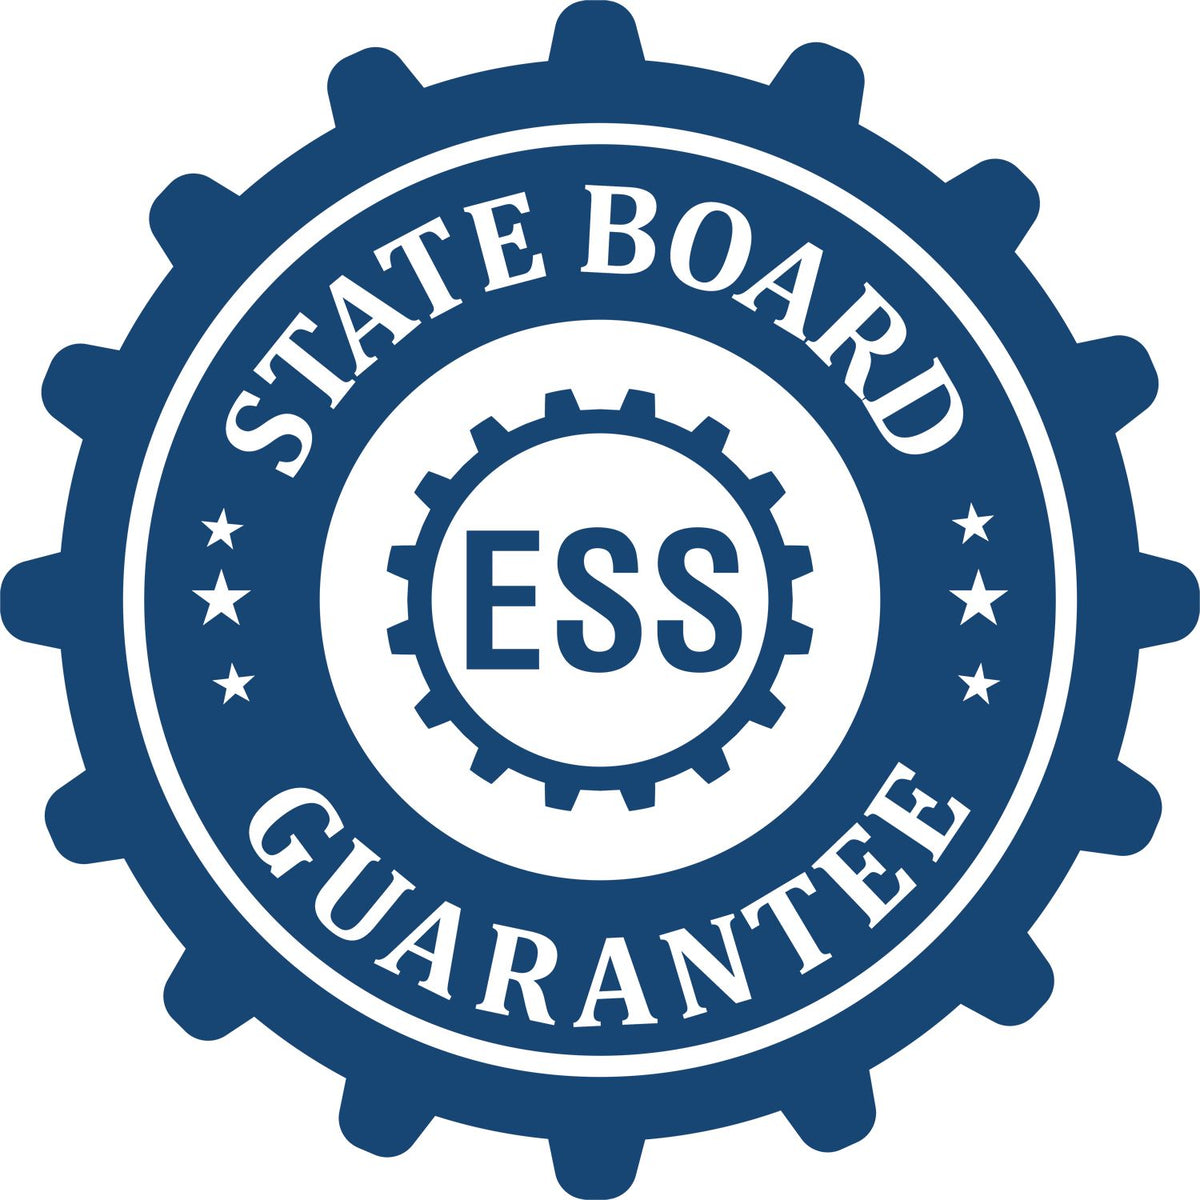 An emblem in a gear shape illustrating a state board guarantee for the Heavy-Duty Rhode Island Rectangular Notary Stamp product.